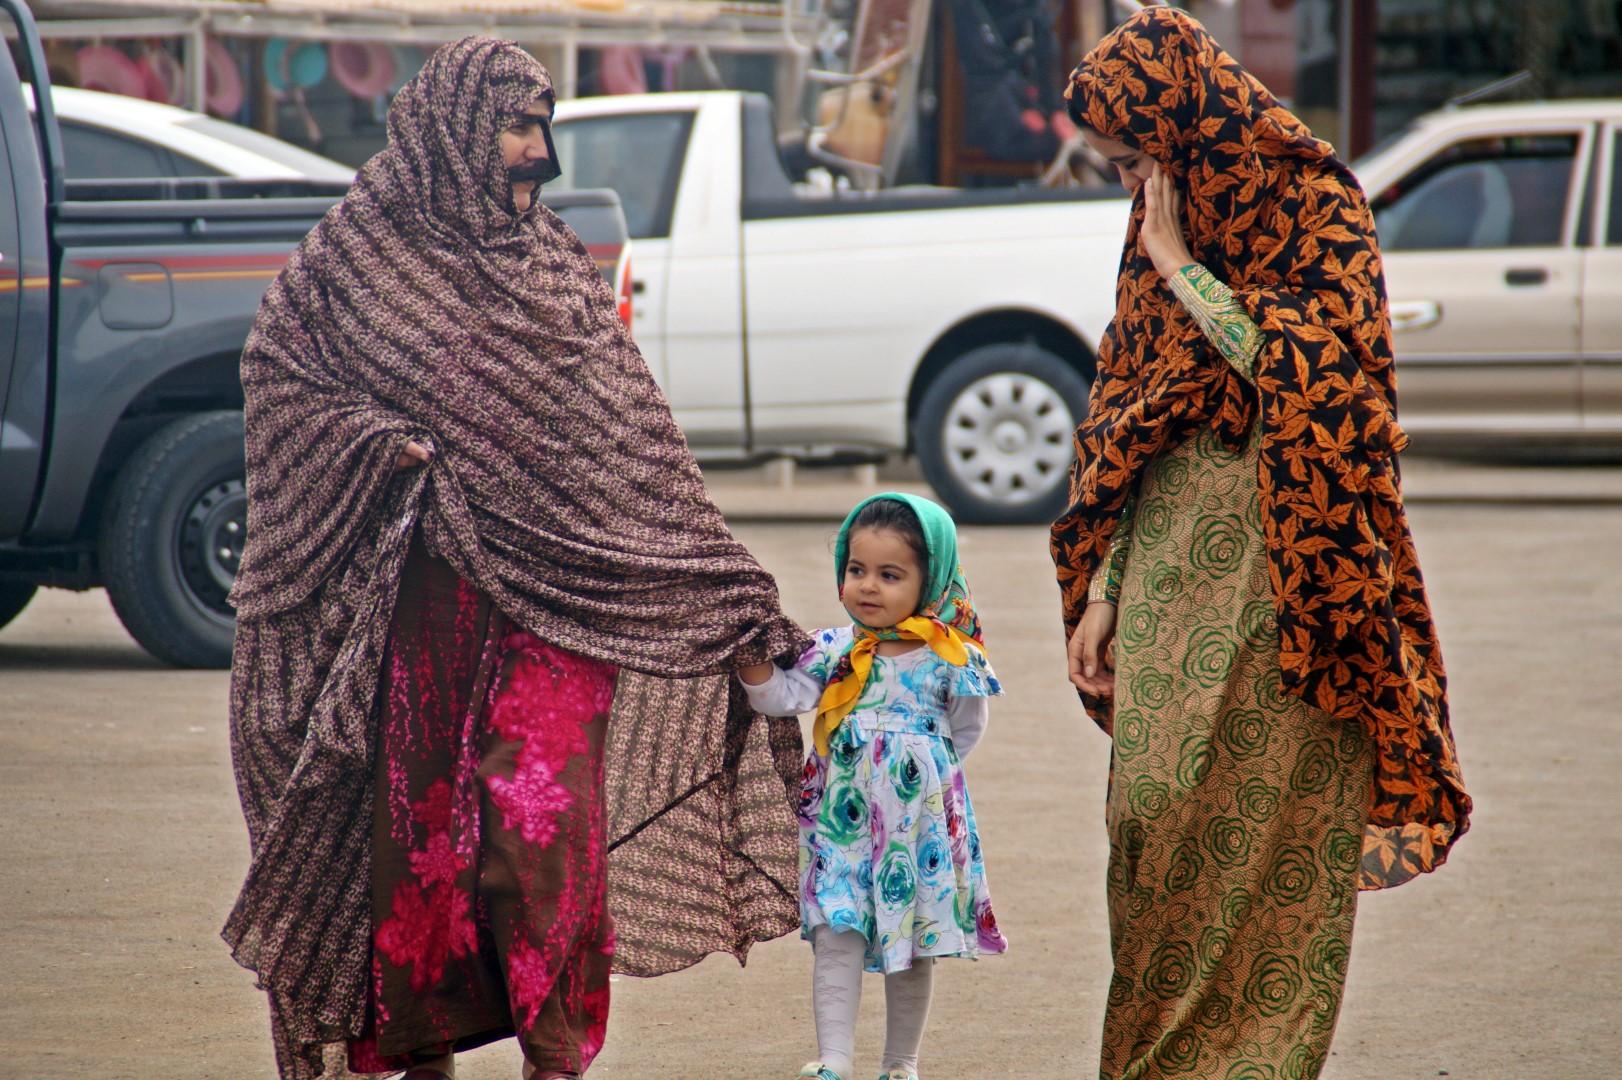 Colourful women and girl in Qeshm - notice the women in pink/purple wearing the traditional mask